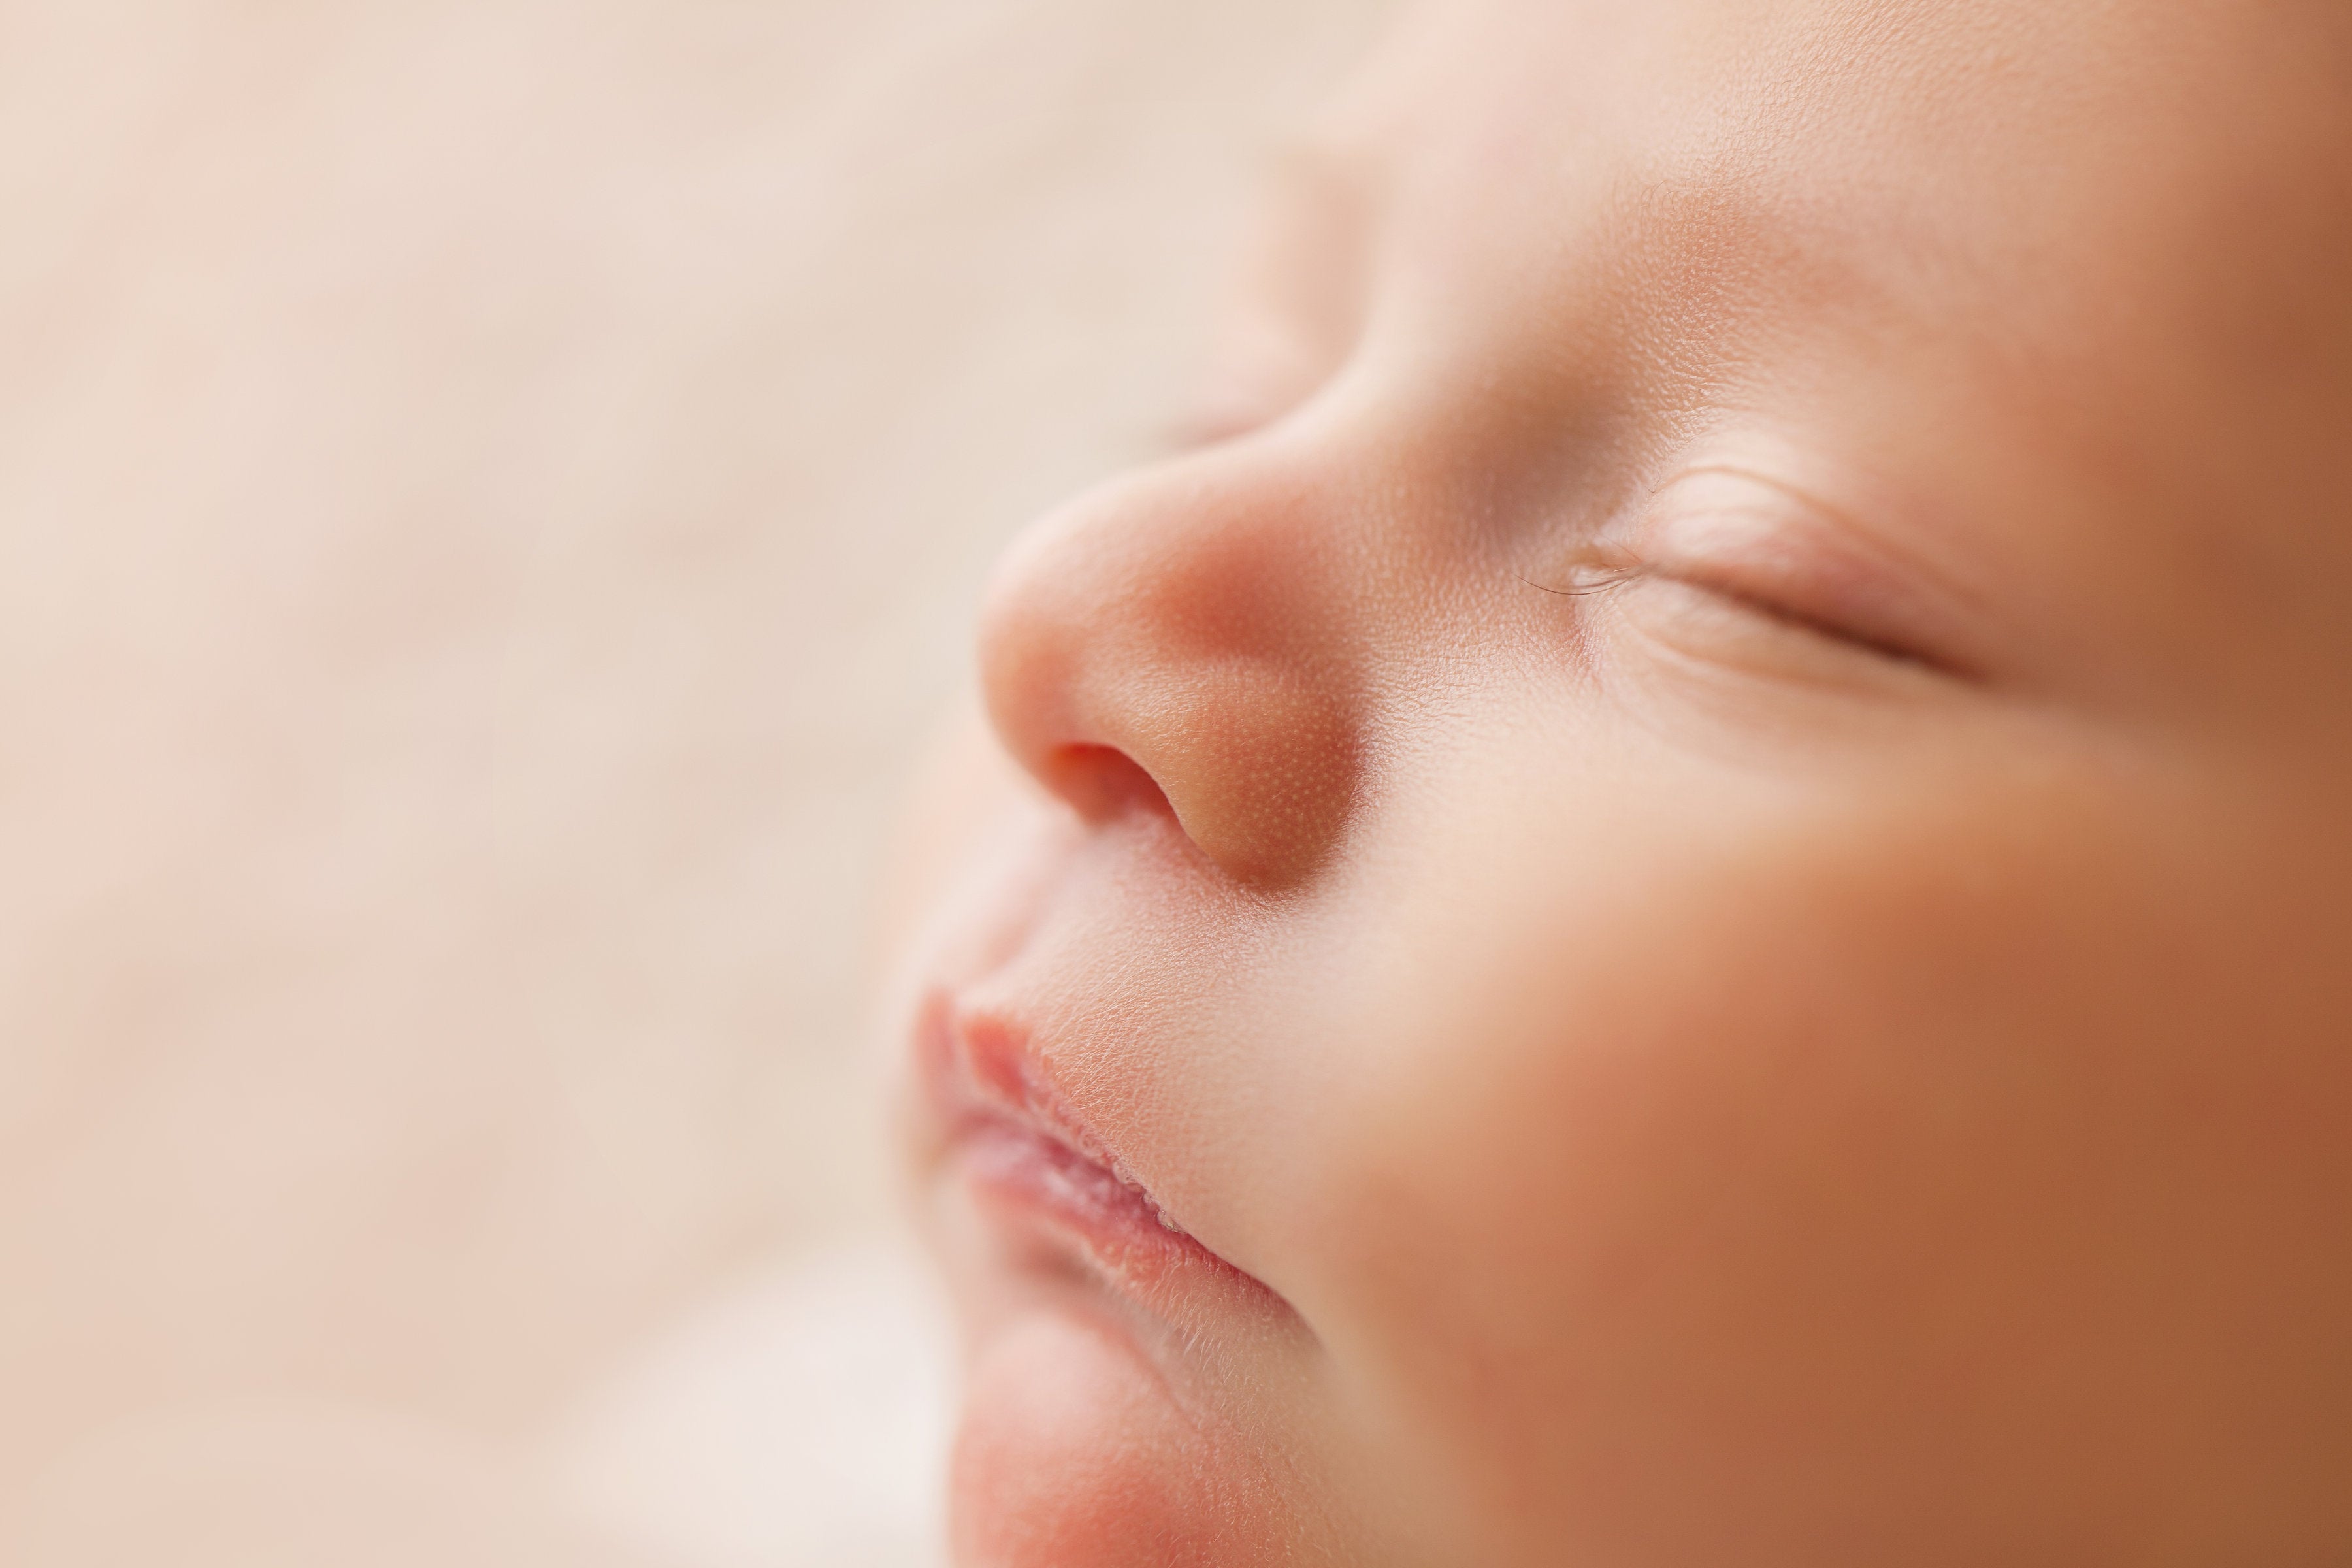 The importance of sleep for child development